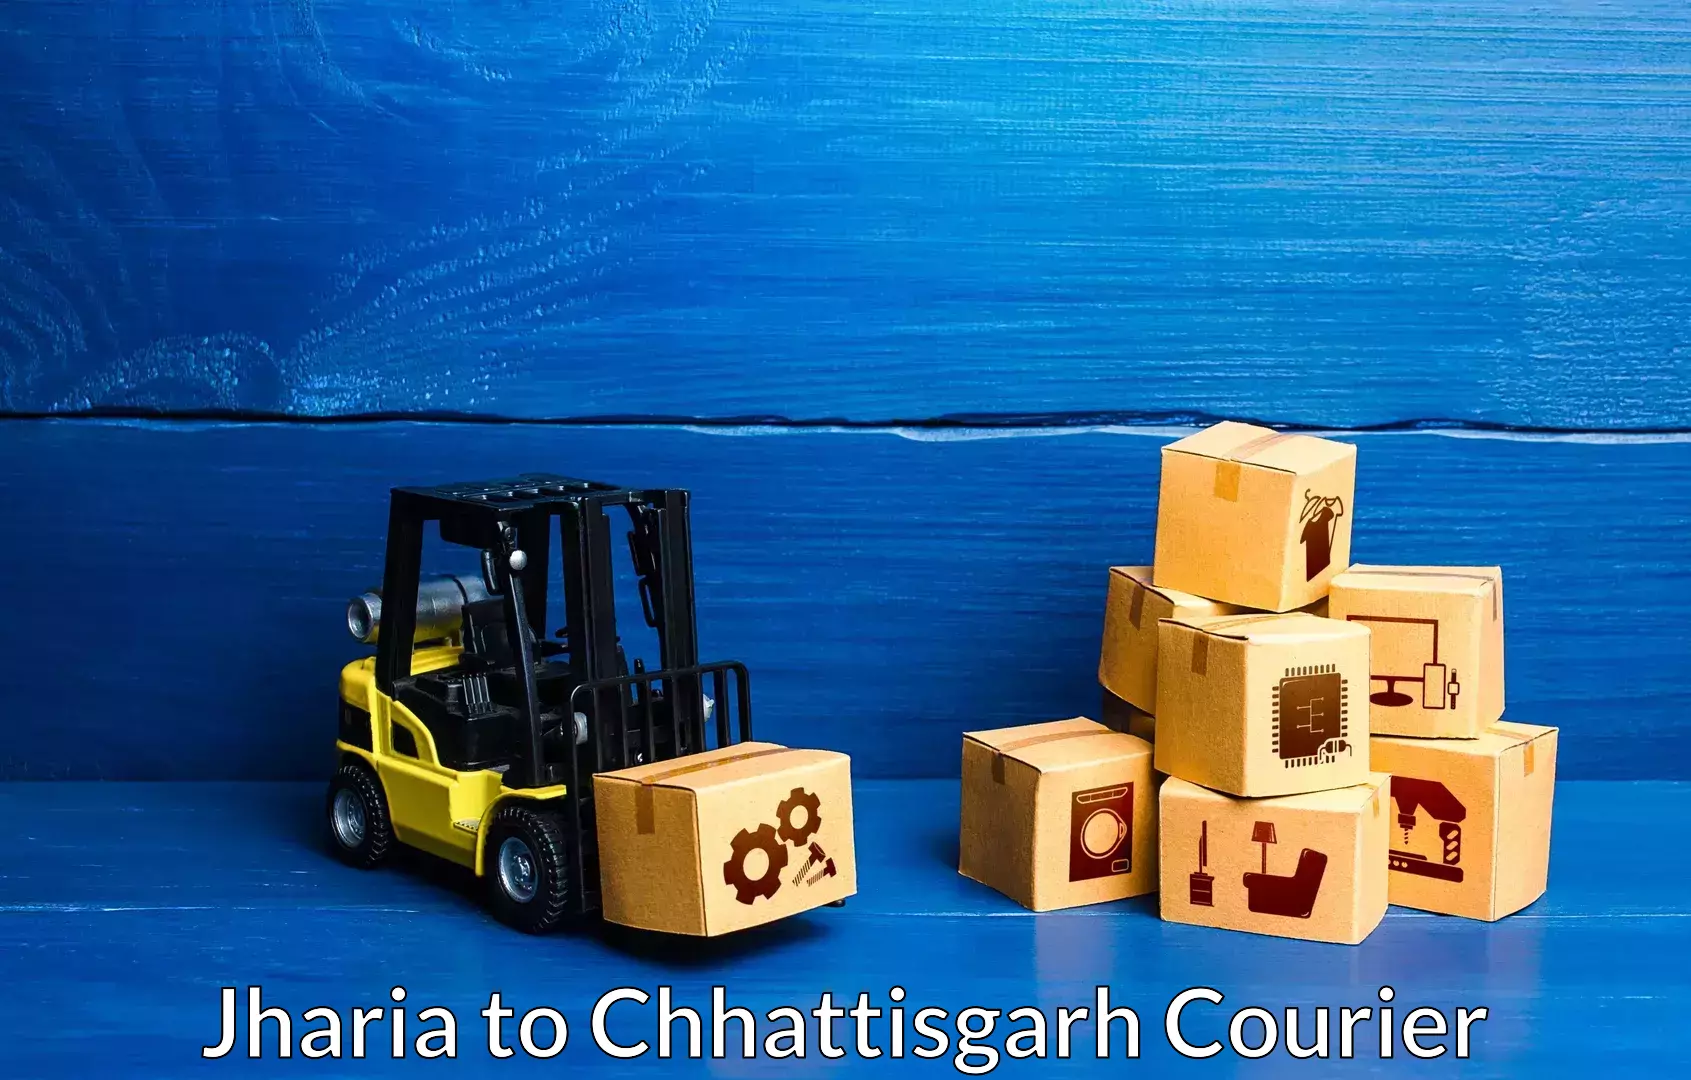 Furniture delivery service Jharia to Mandhar